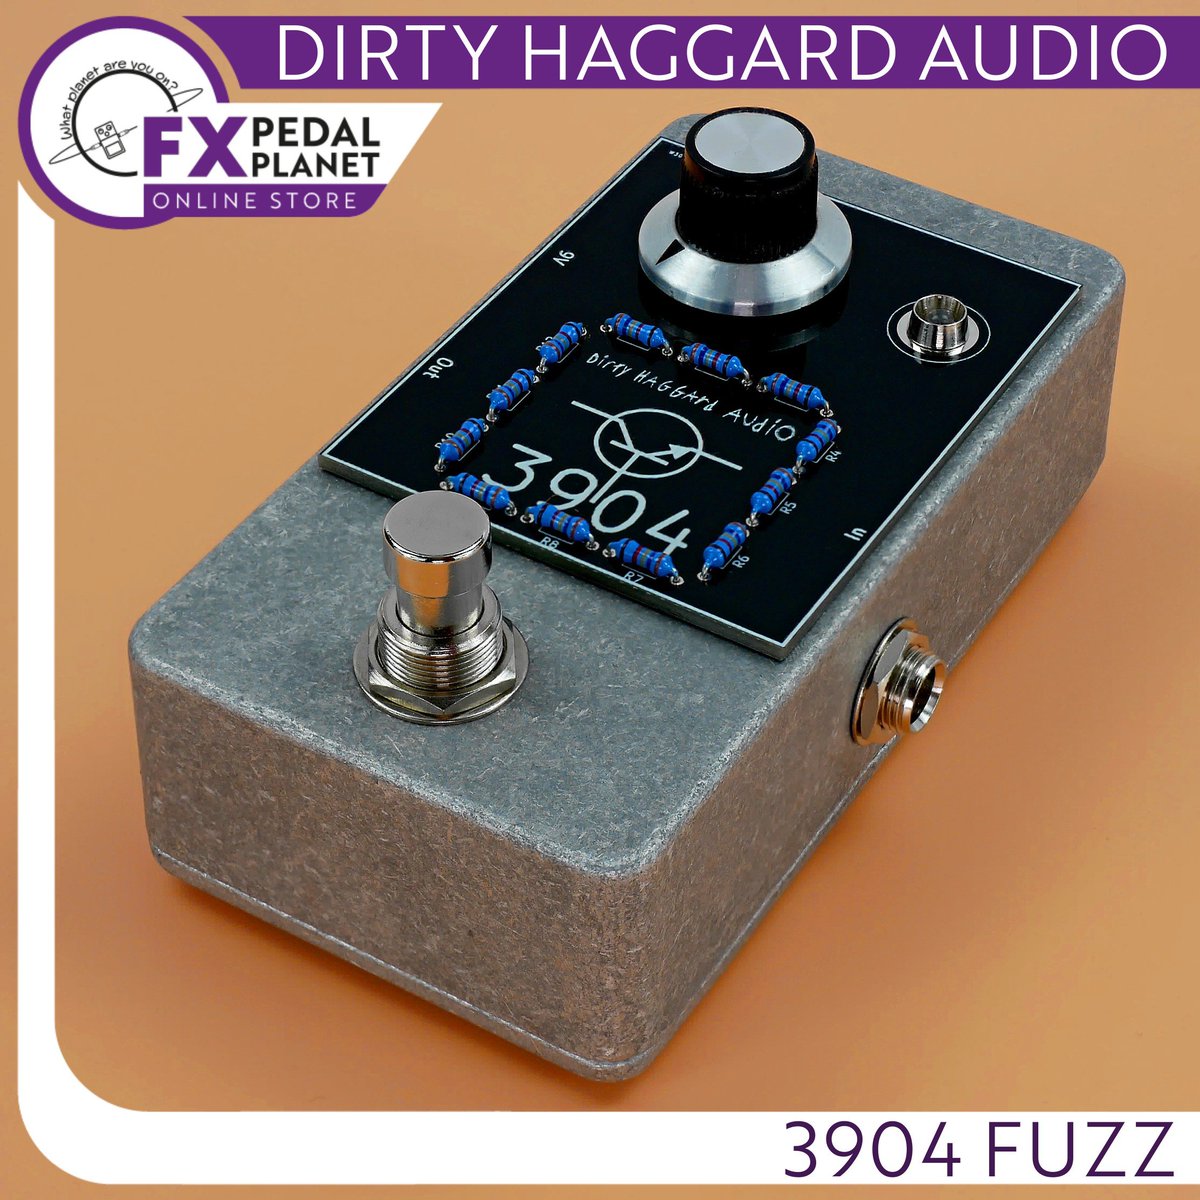 Presenting the Dirty Haggard Audio 3904: a boutique effects pedal that offers impressive performance at an affordable price. 

#FXPedalPlanetOnlineStore #DirtyHaggardAudio #Fuzz #MusicGear
#EffectPedals #GuitarTone #BoutiquePedals #GuitarEffects #PedalBoard  #GuitarPlayers